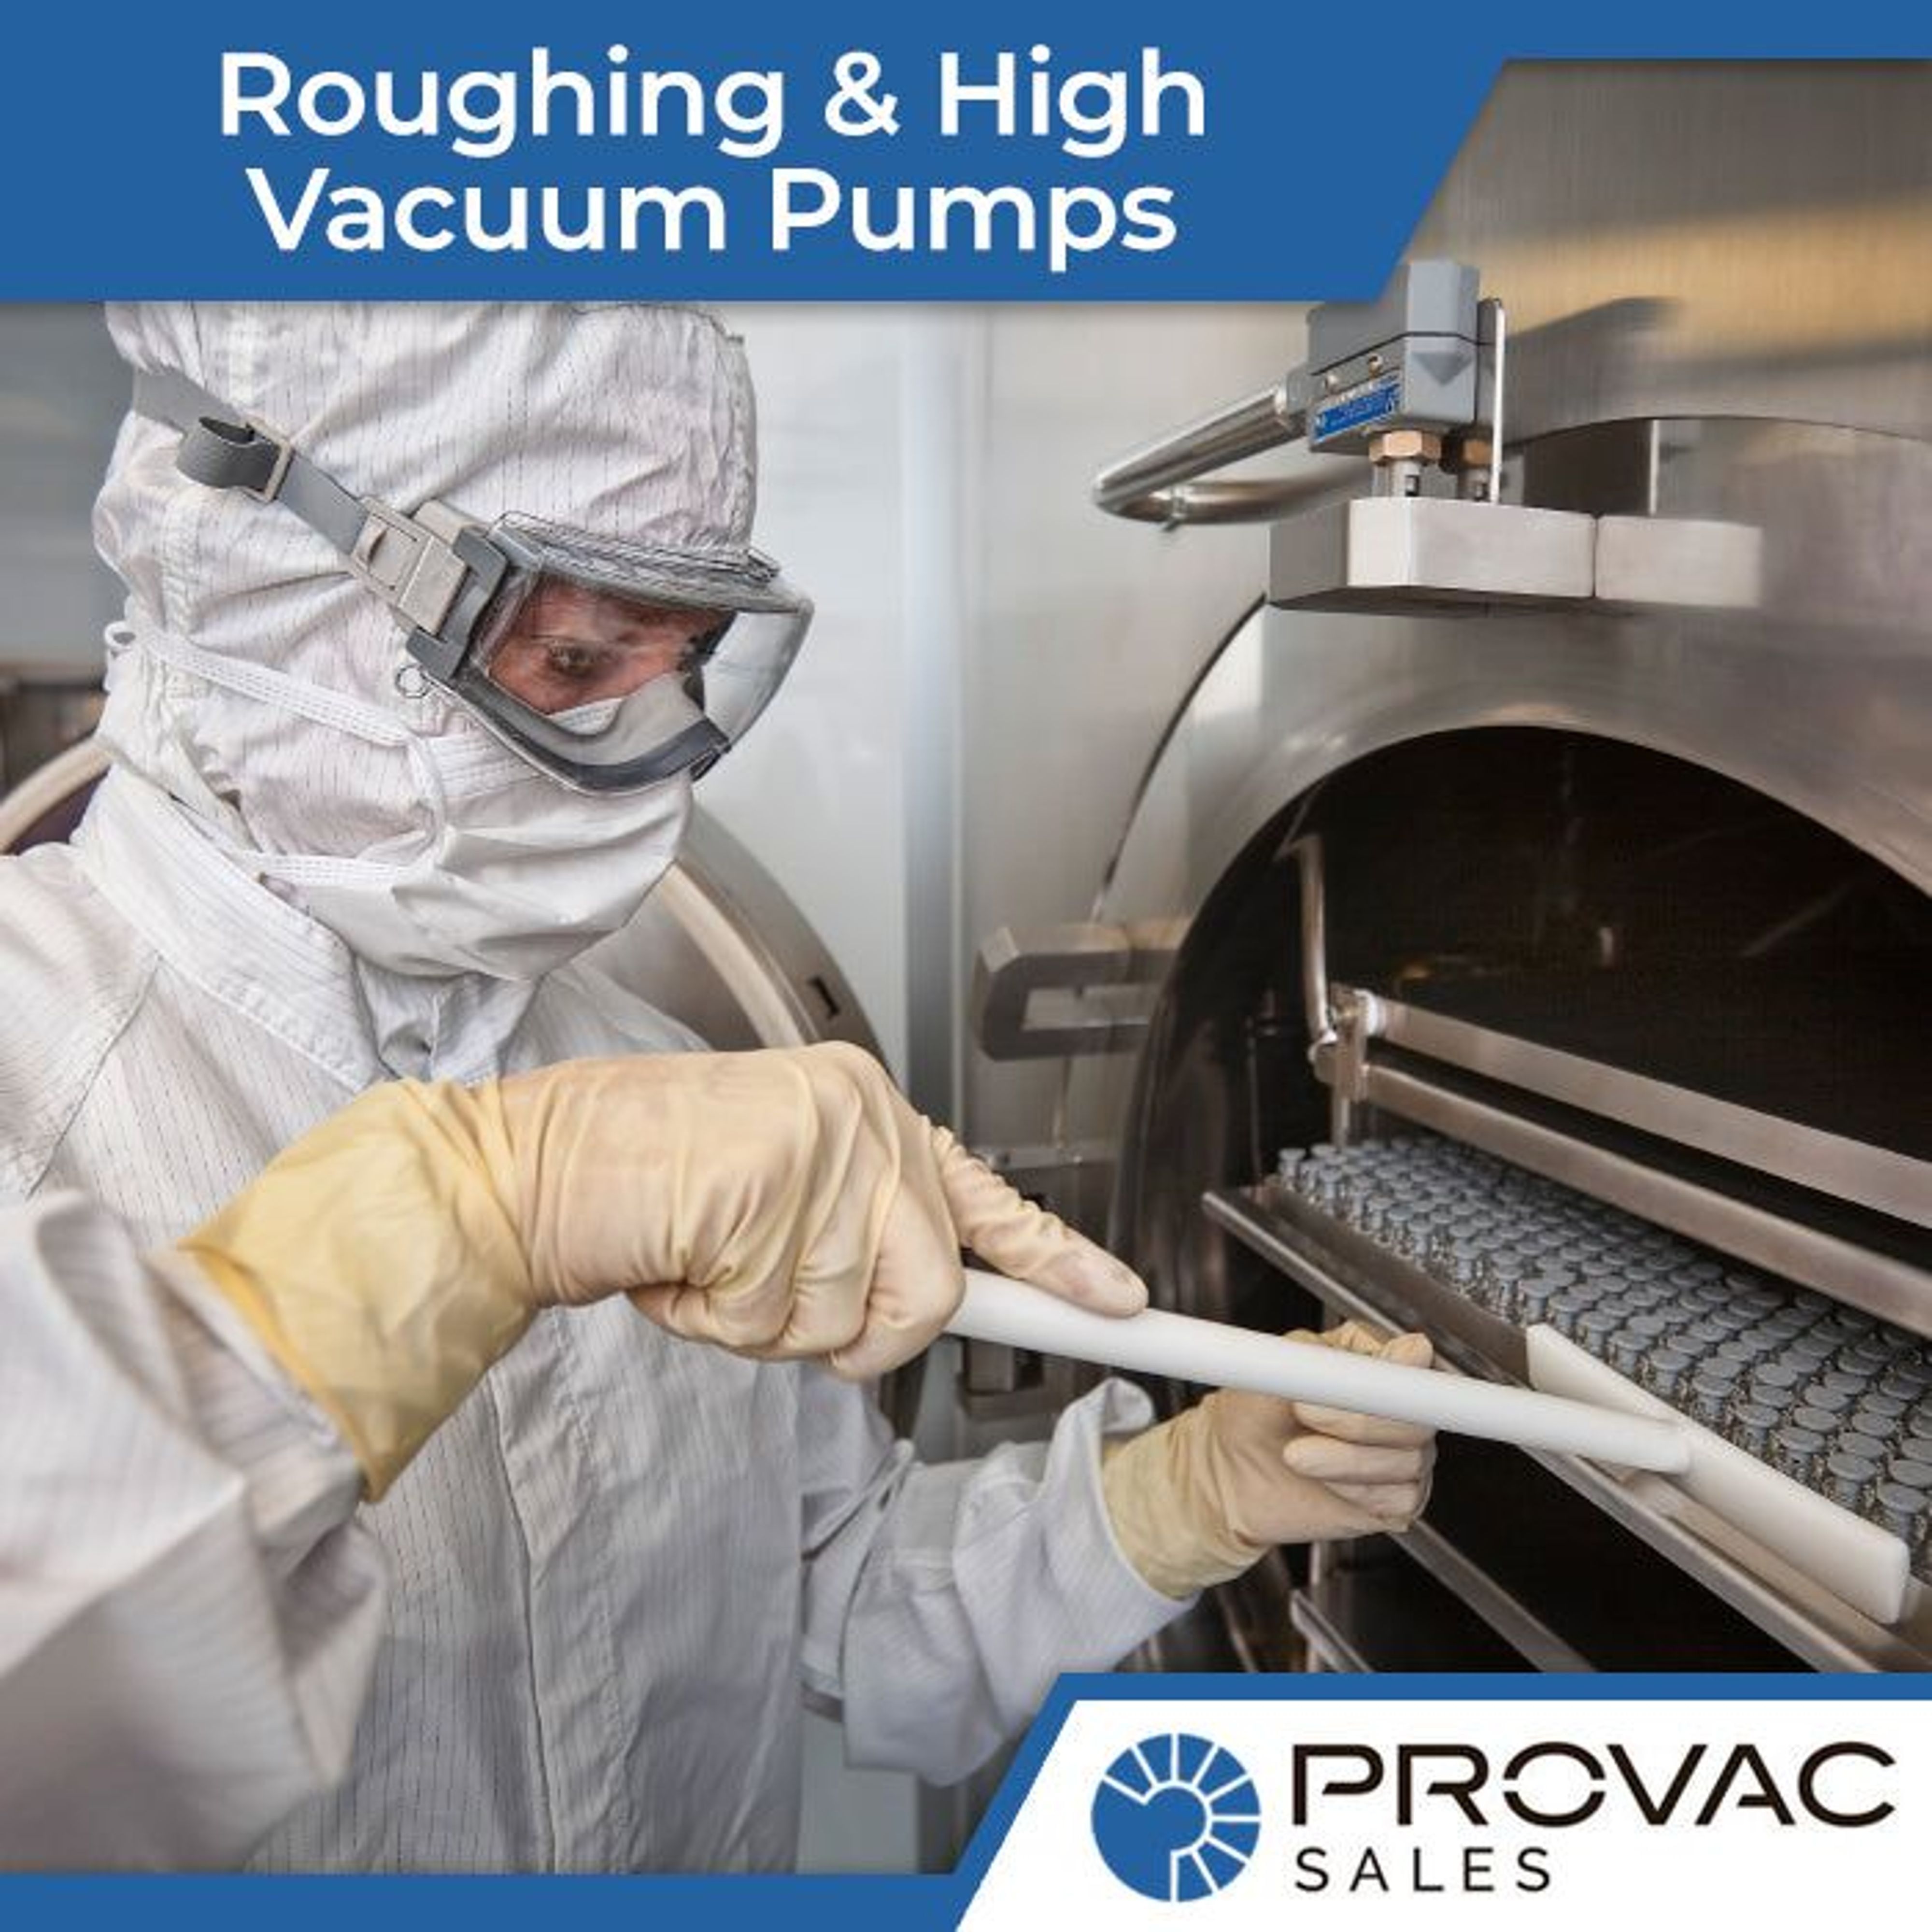 Roughing & High Vacuum Pumps for Your Laboratory & R&D Applications Background